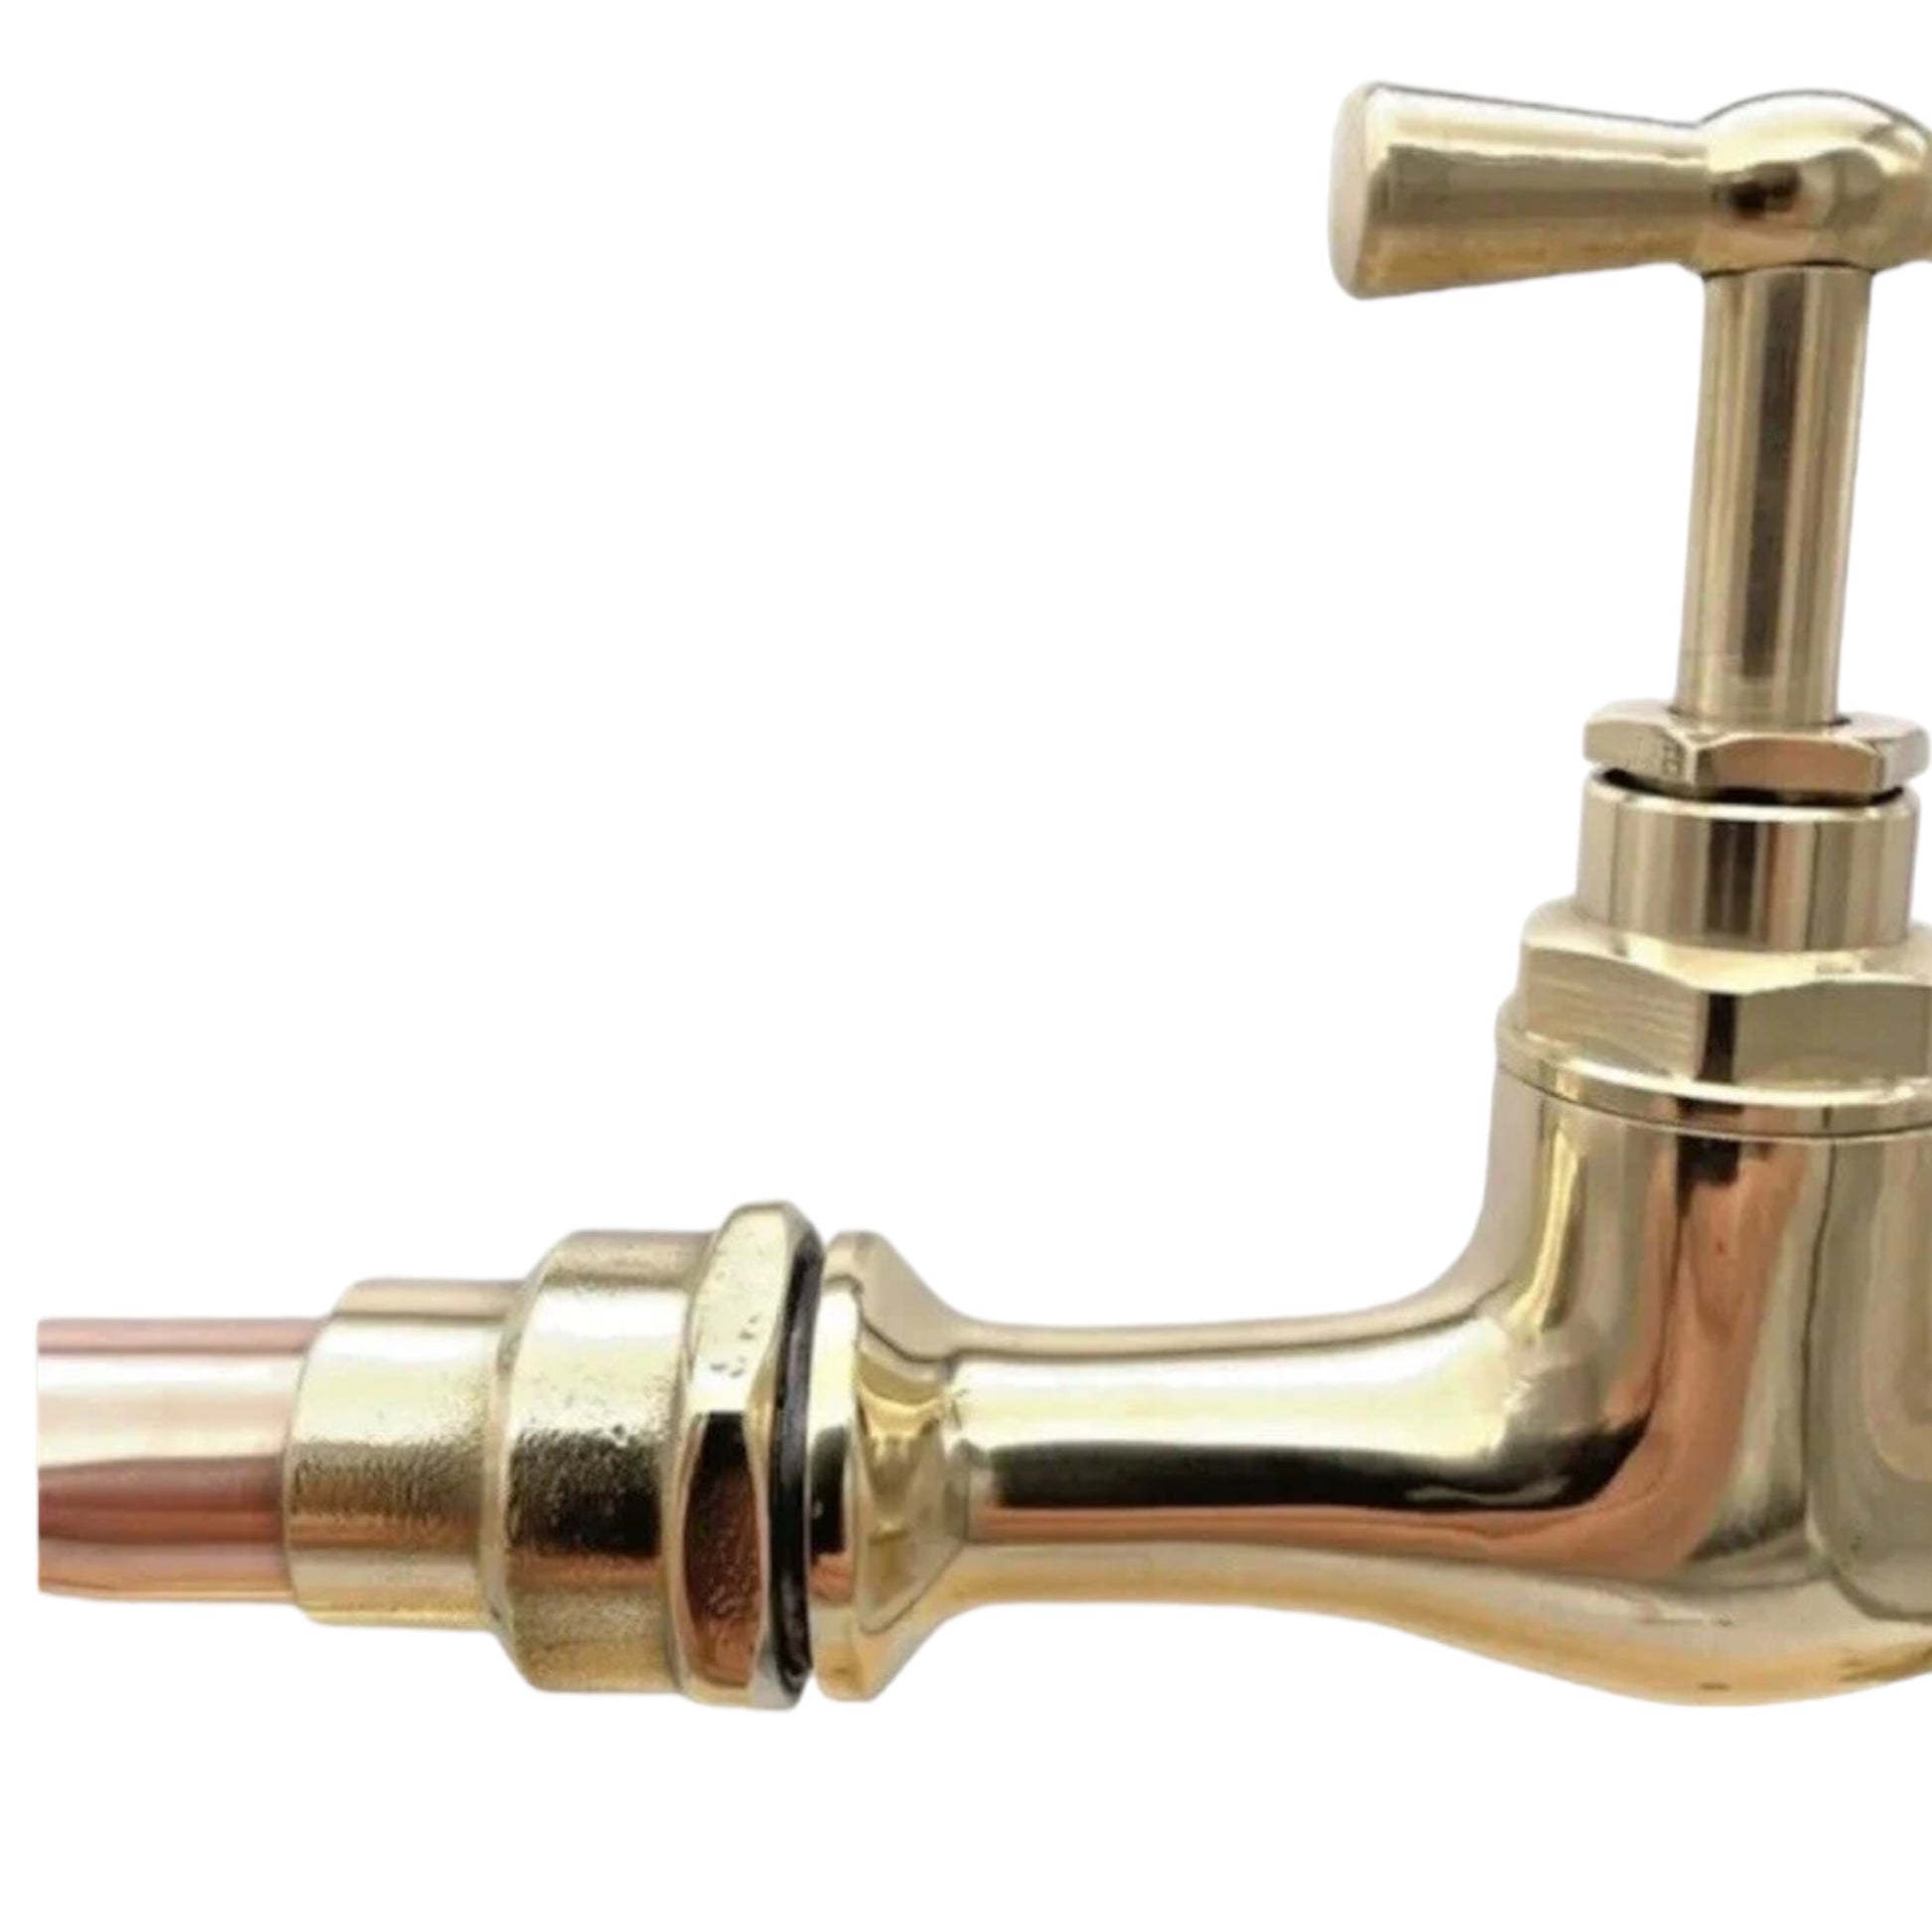 Copper and brass wall mounted kitchen or bathroom tap sold by All Things French Store